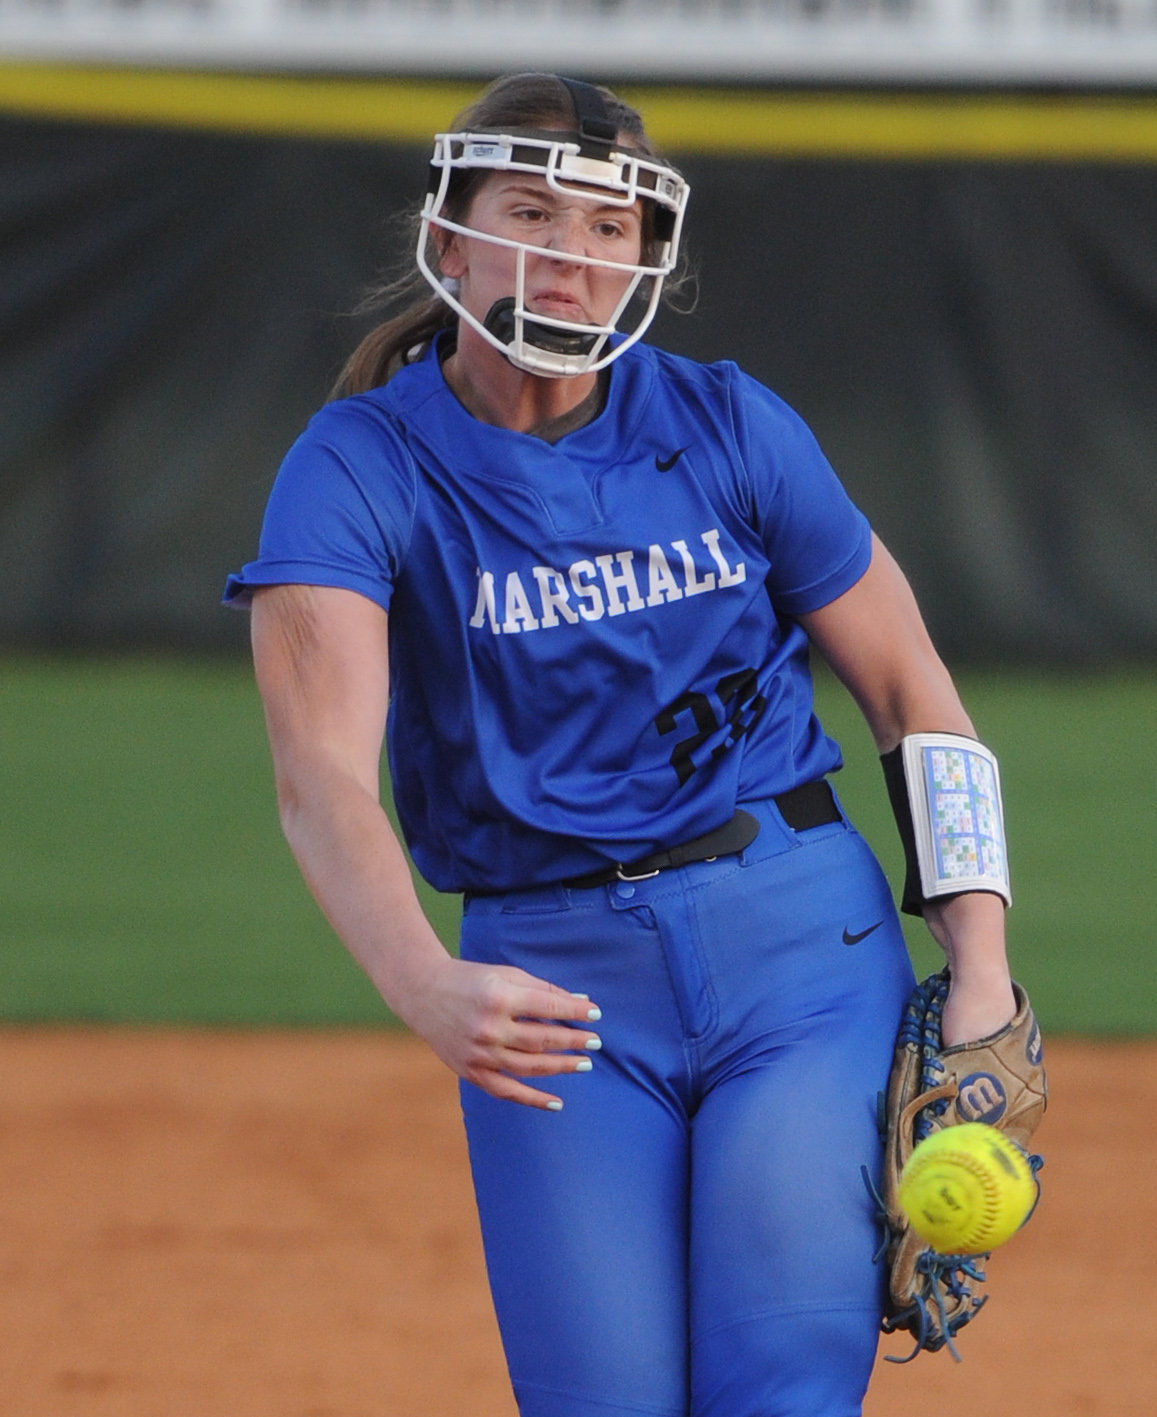 Haylee Hobby was in total control against Tullahoma. She gave up just four hits and preserved the shutout, while striking out four Lady Wildcat batters in the process.